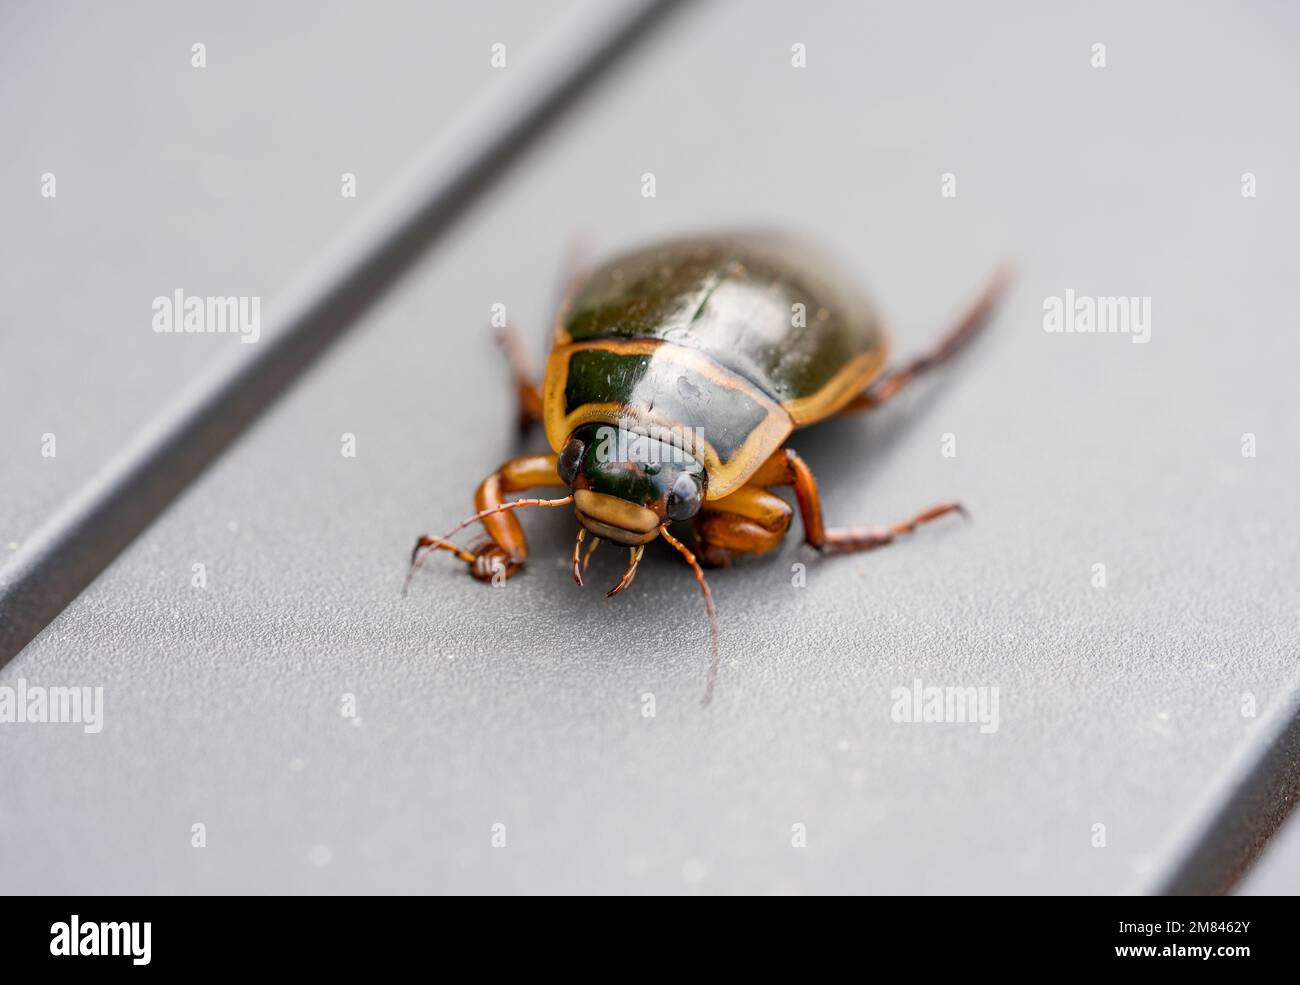 Great diving beetle on a gray background. Insect close-up. Dytiscus marginalis. Stock Photo